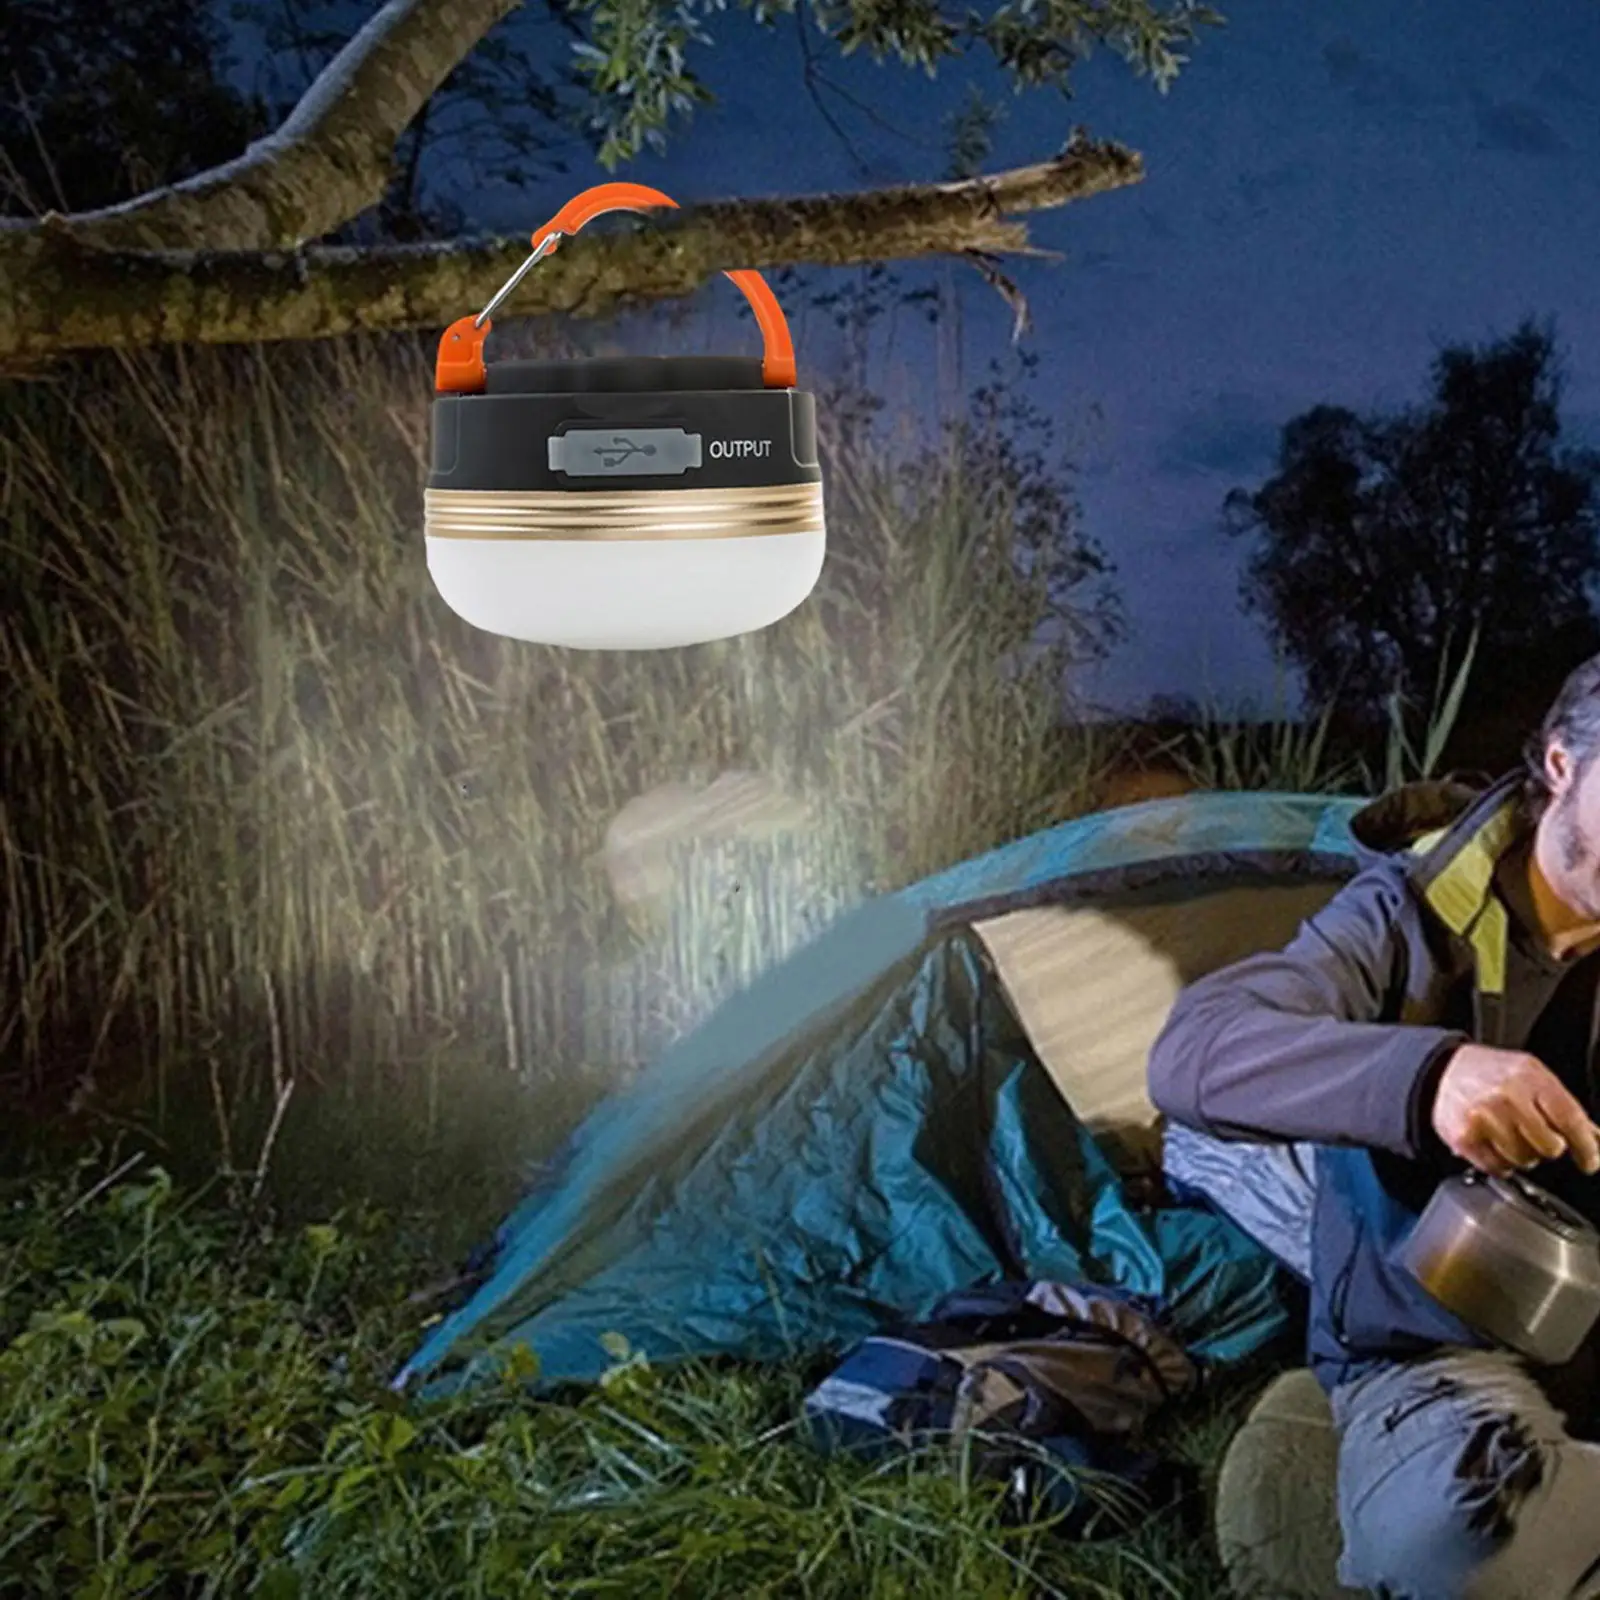 LED Camping Lantern 3 Light Modes Hanging Tent Light Electric Lantern for Power Failure Hiking Outage Fishing Camping Equipment